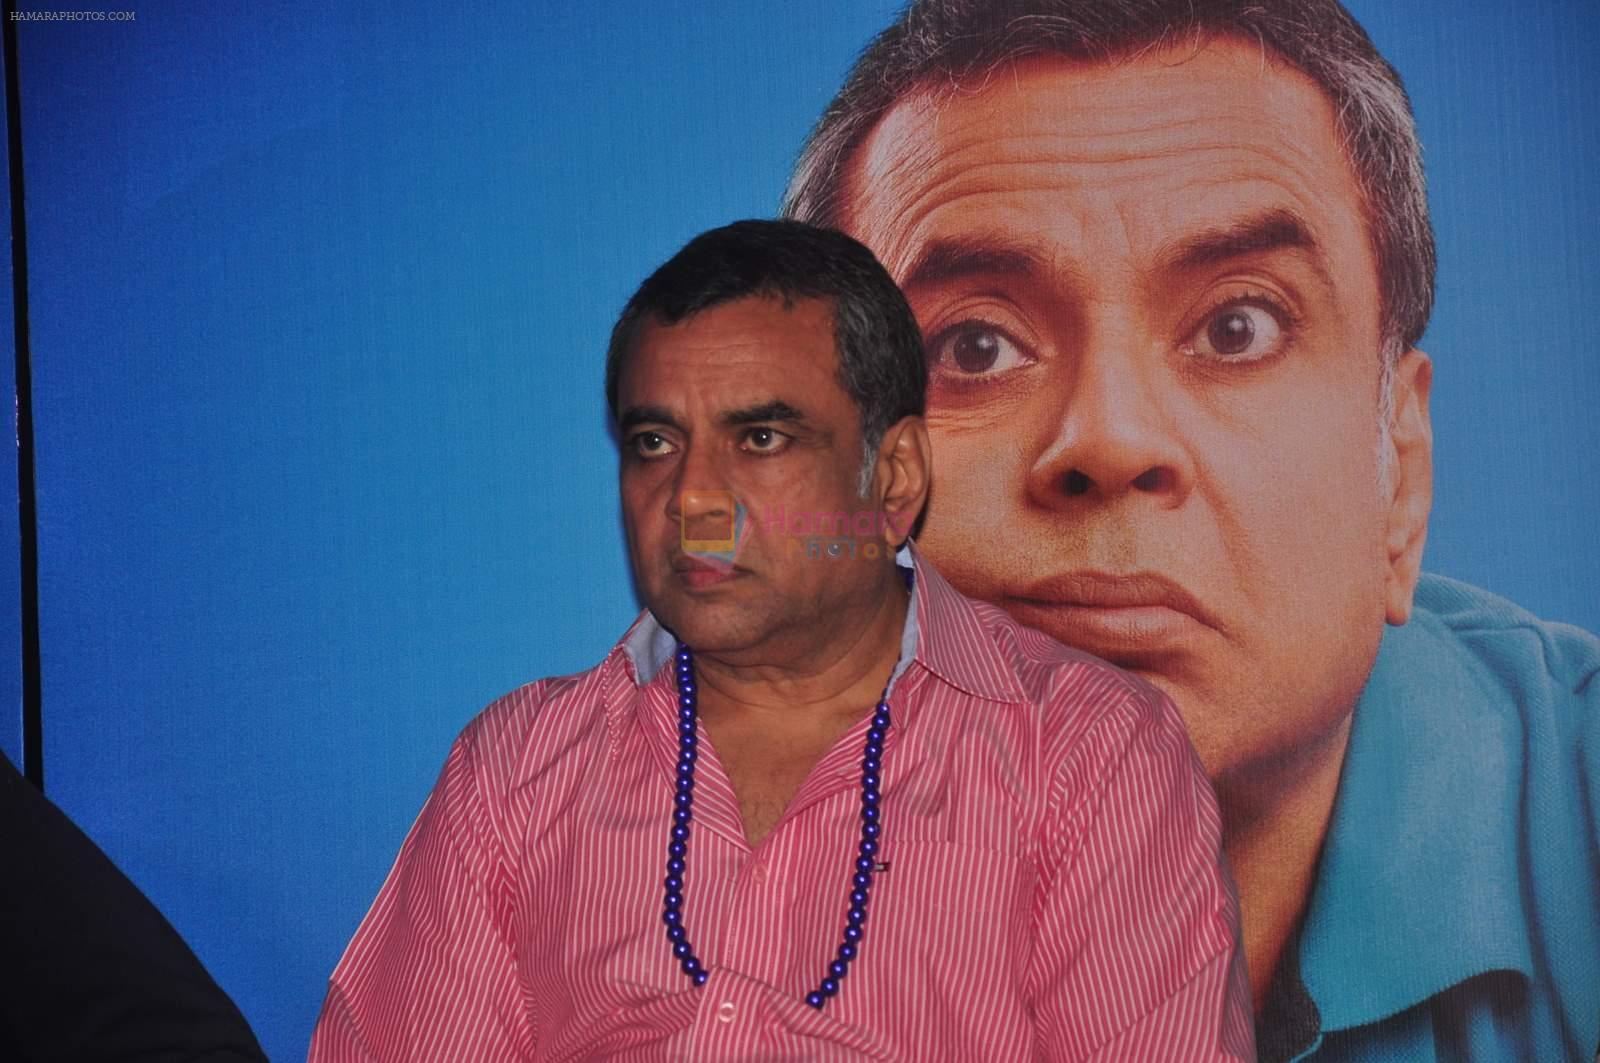 Paresh Rawal at Dharam Sankat Mein film launch in Cinemax on 7th March 2015